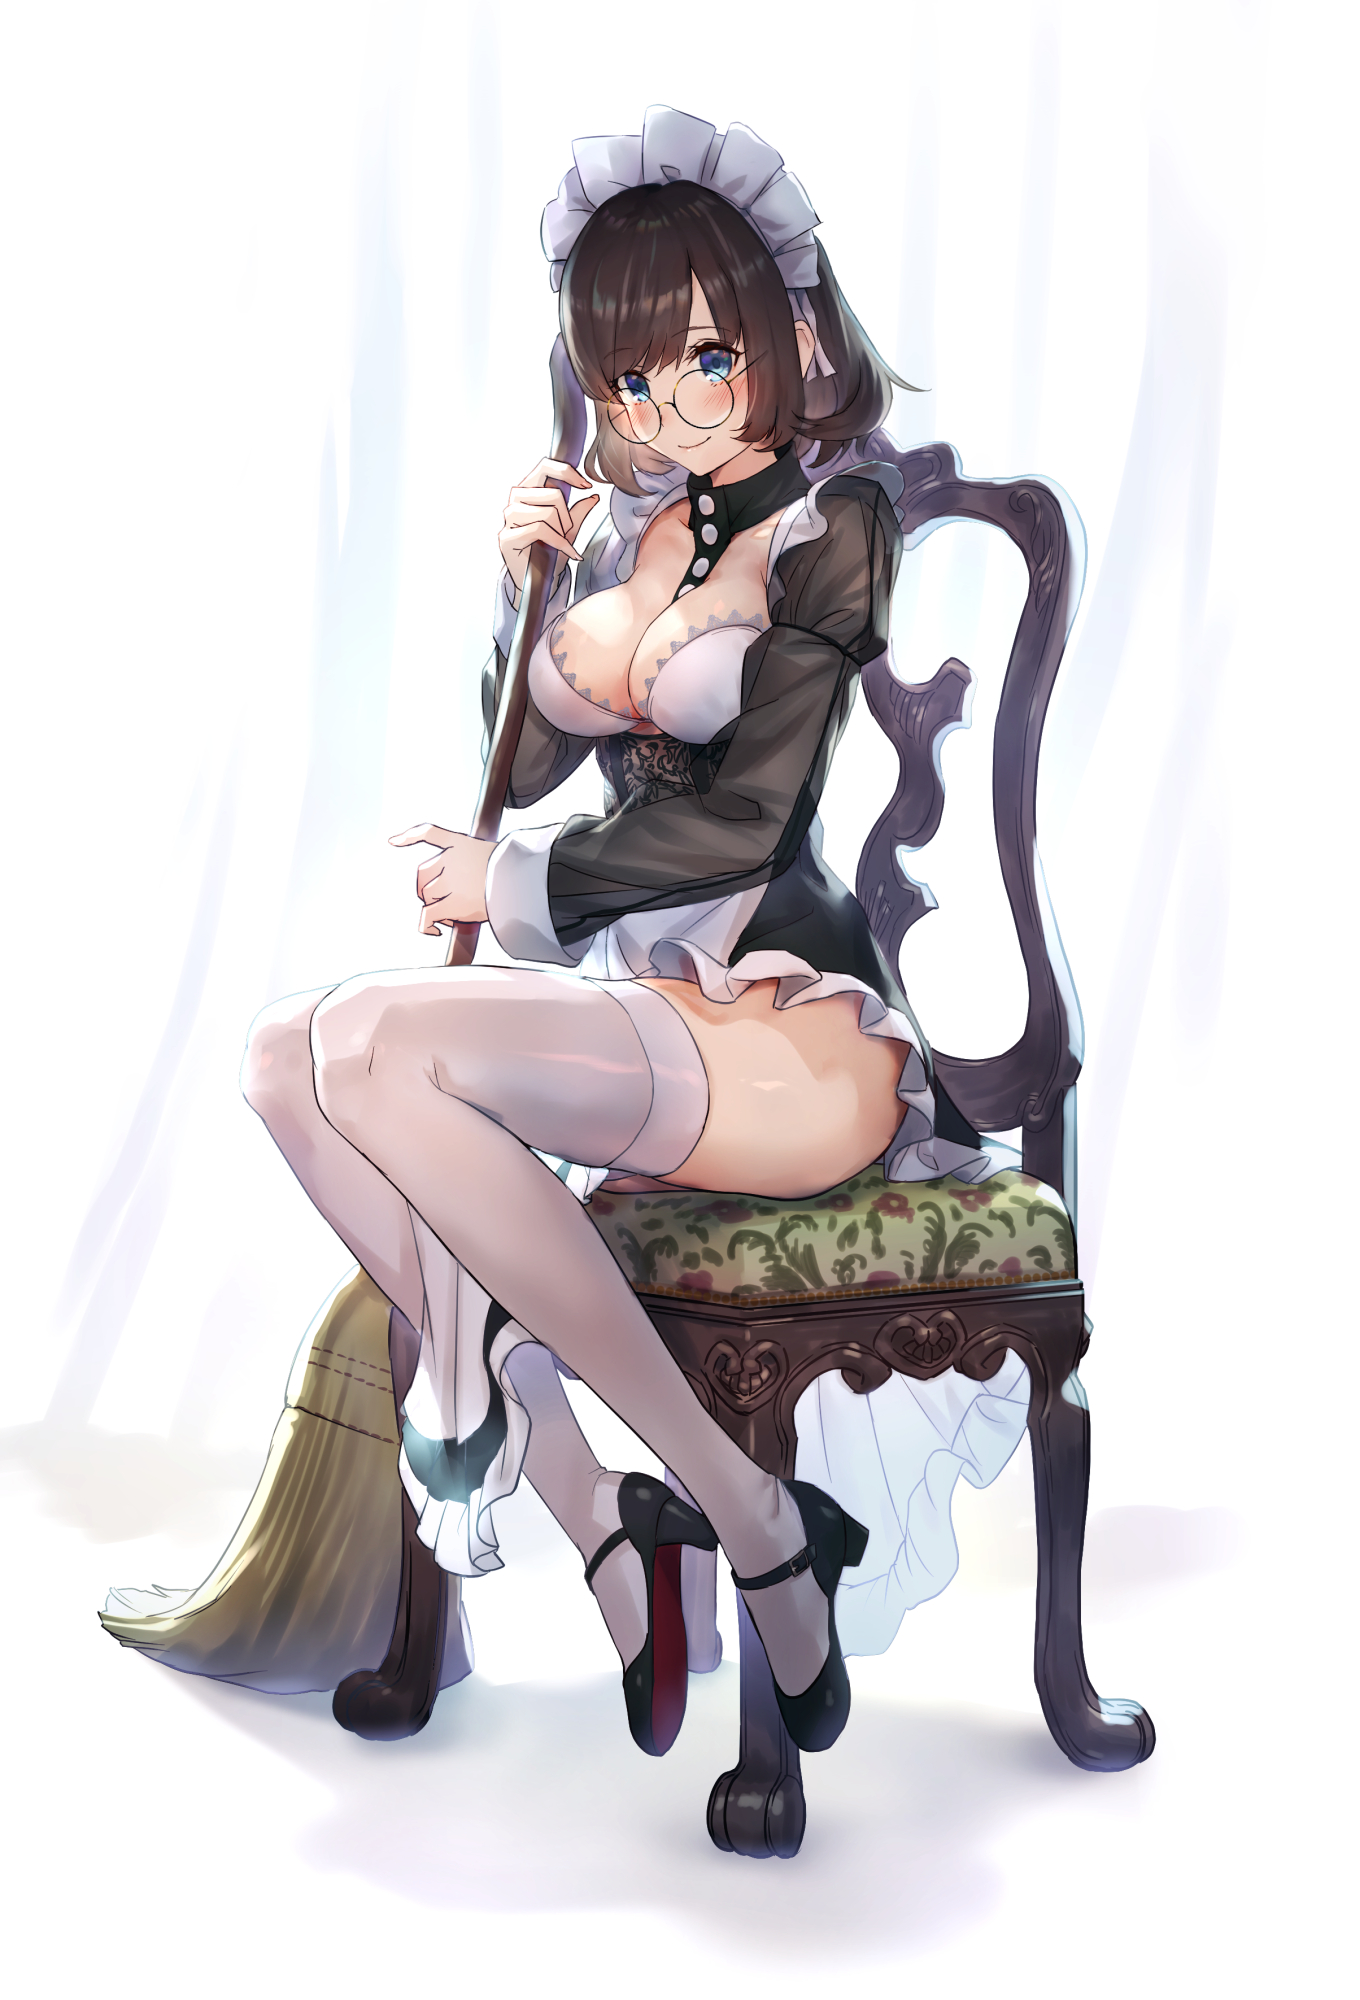 Anime 1360x2000 anime anime girls digital art artwork 2D portrait display French maid maid outfit thigh-highs cleavage glasses blushing smiling brunette blue eyes Shouhei